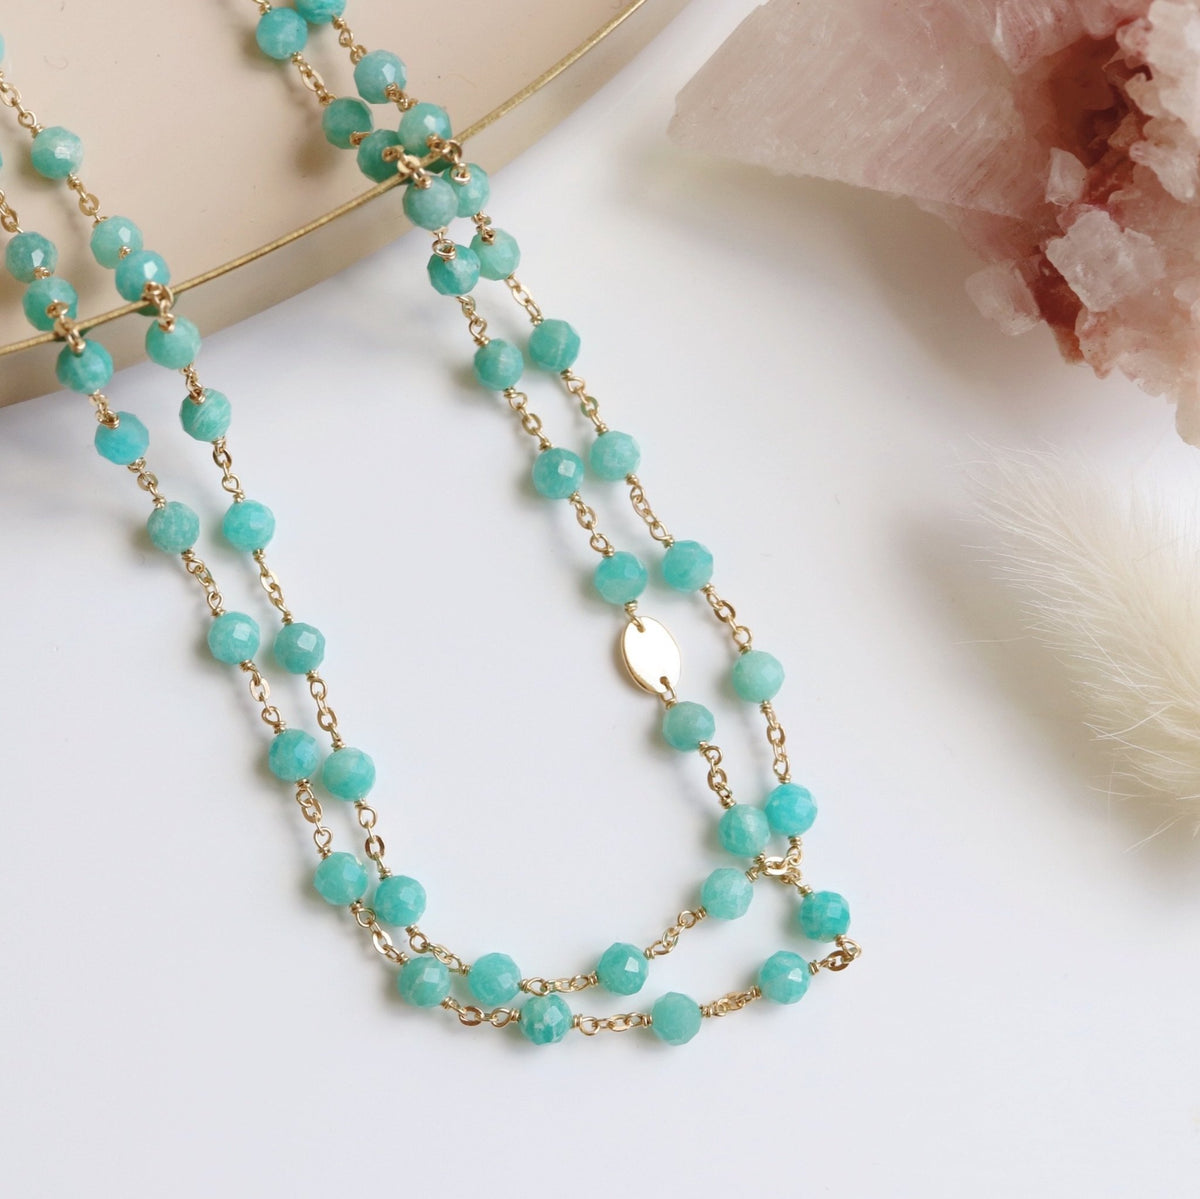 ICONIC LONG BEADED NECKLACE - AQUA ITE & GOLD 34 - SO PRETTY CARA  COTTER